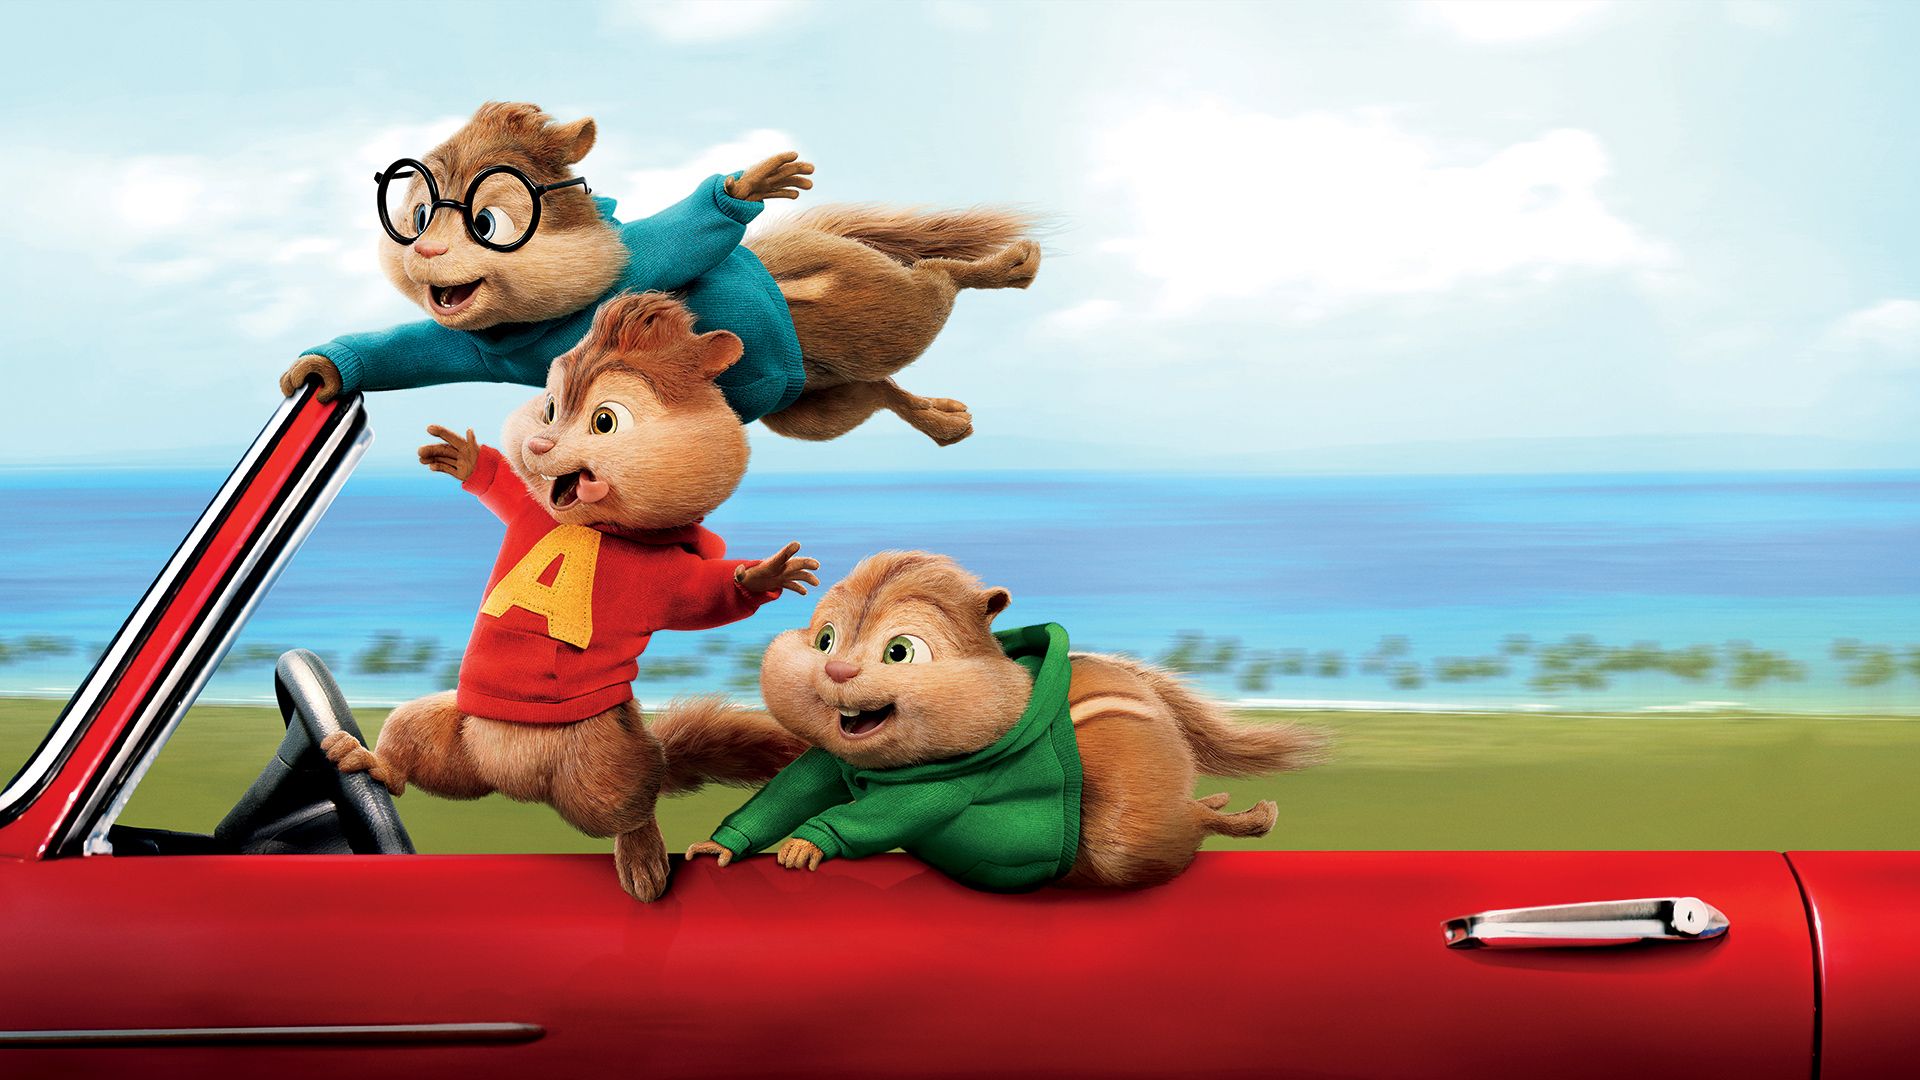 Alvin and the Chipmunks: The Road Chip background